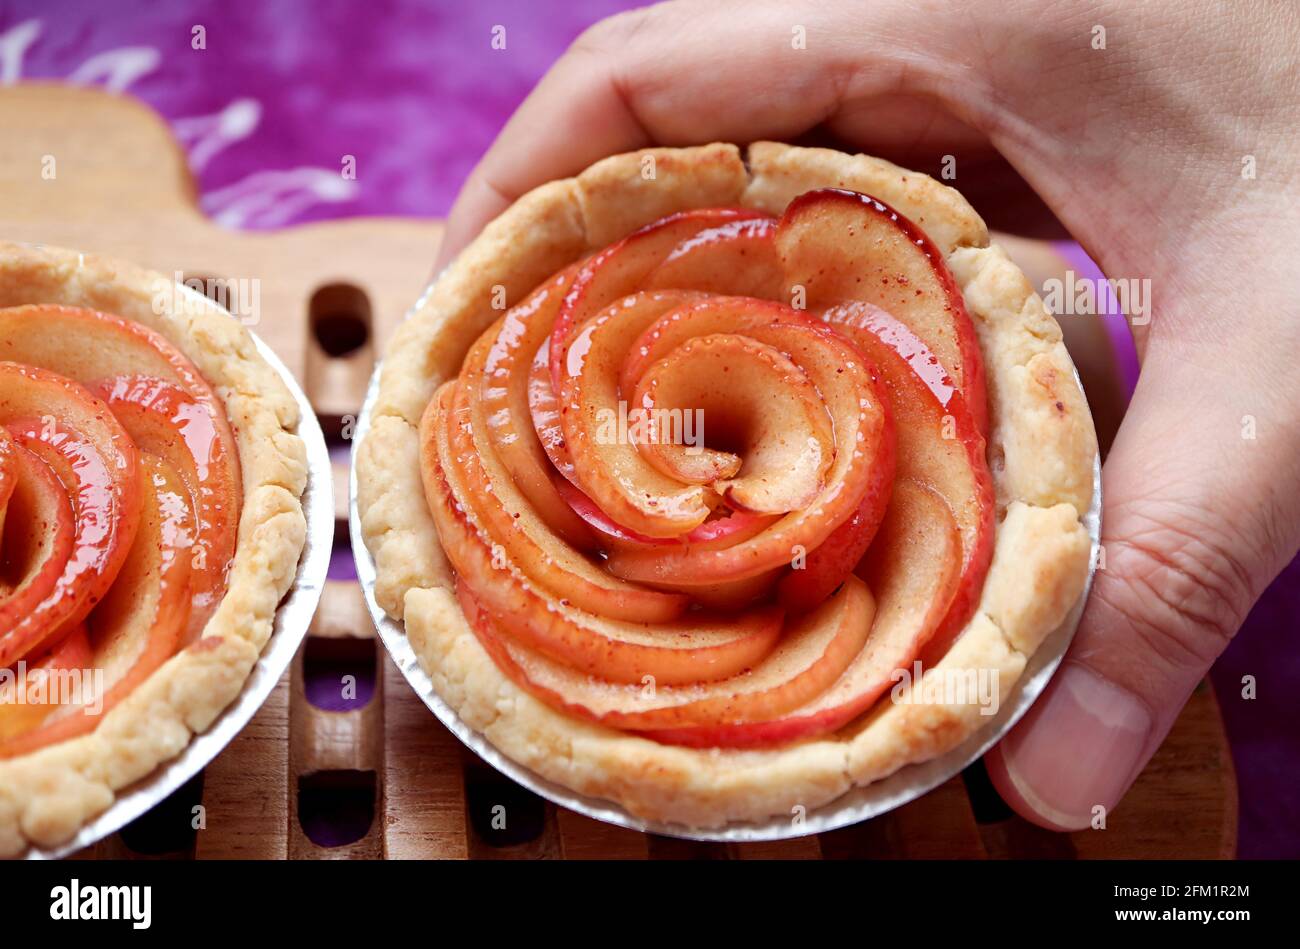 Man's hands placing a fresh baked delectable mini apple rose tartlet on the wooden breadboard Stock Photo